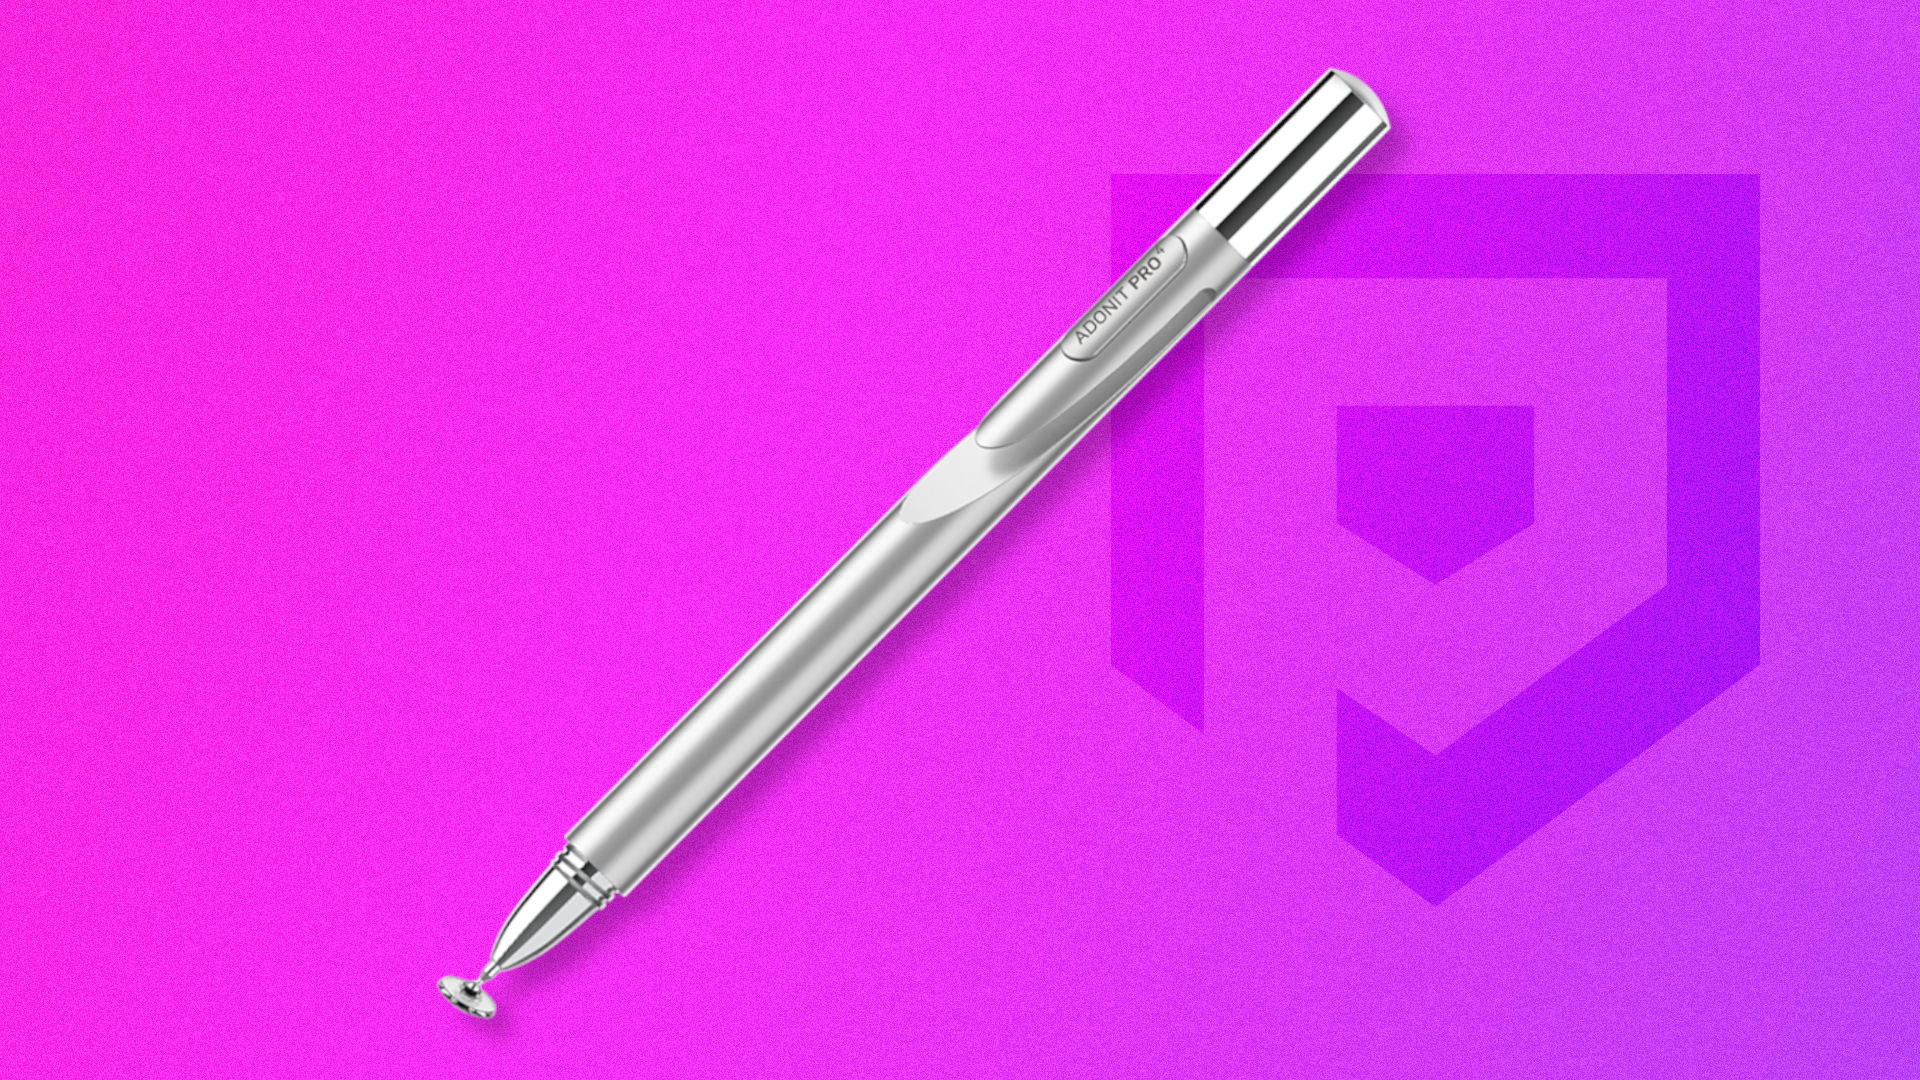 A picture of one of the best stylus for iPad and iPhone, the Adonit Pro 4, against a purple and pink Pocket Tactics background